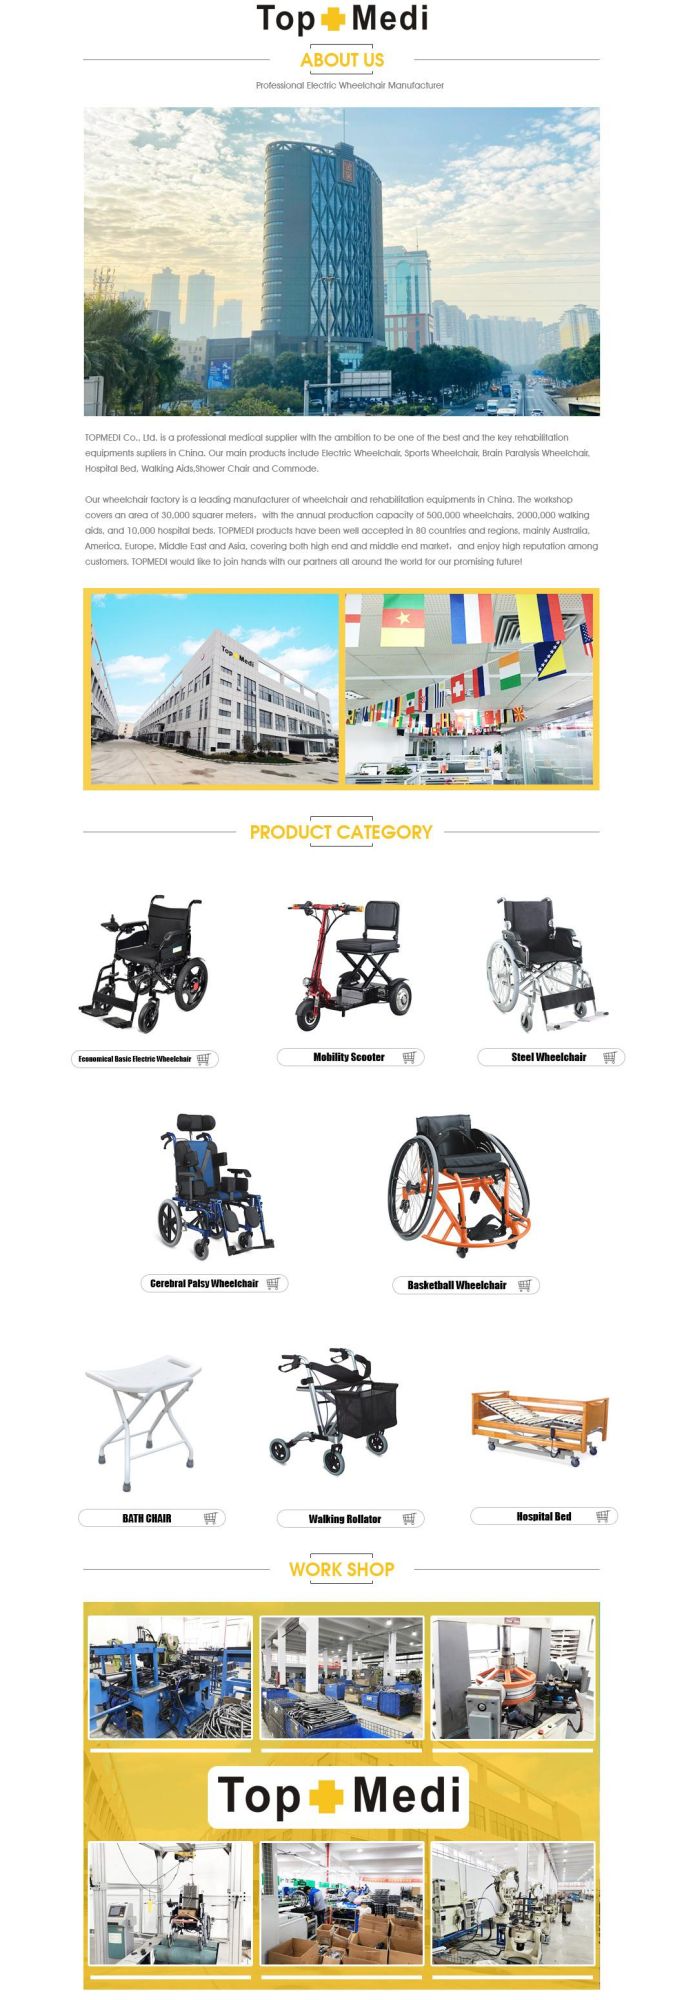 Anti-Tippers and Carrying Wheel Foldable Aluminum Wheelchair